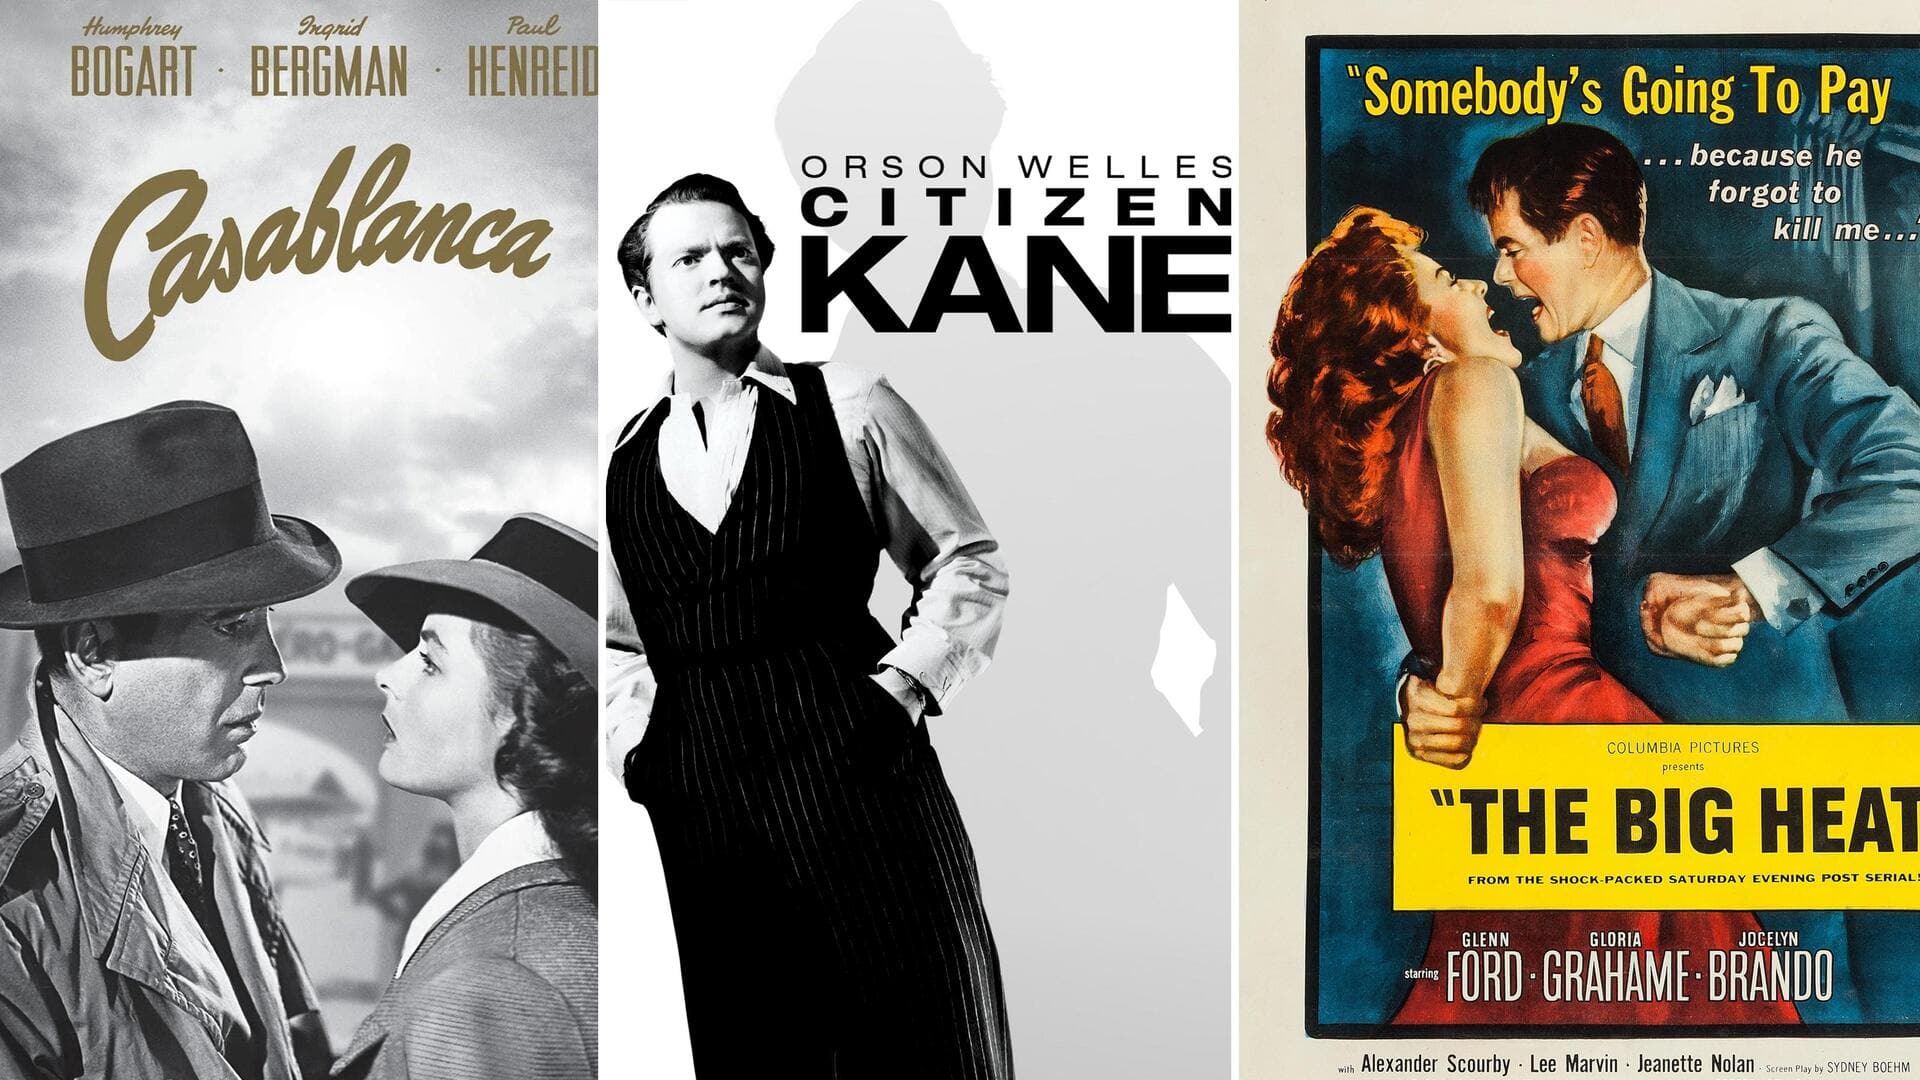 Top 5 Hollywood films of the 1940s-50s